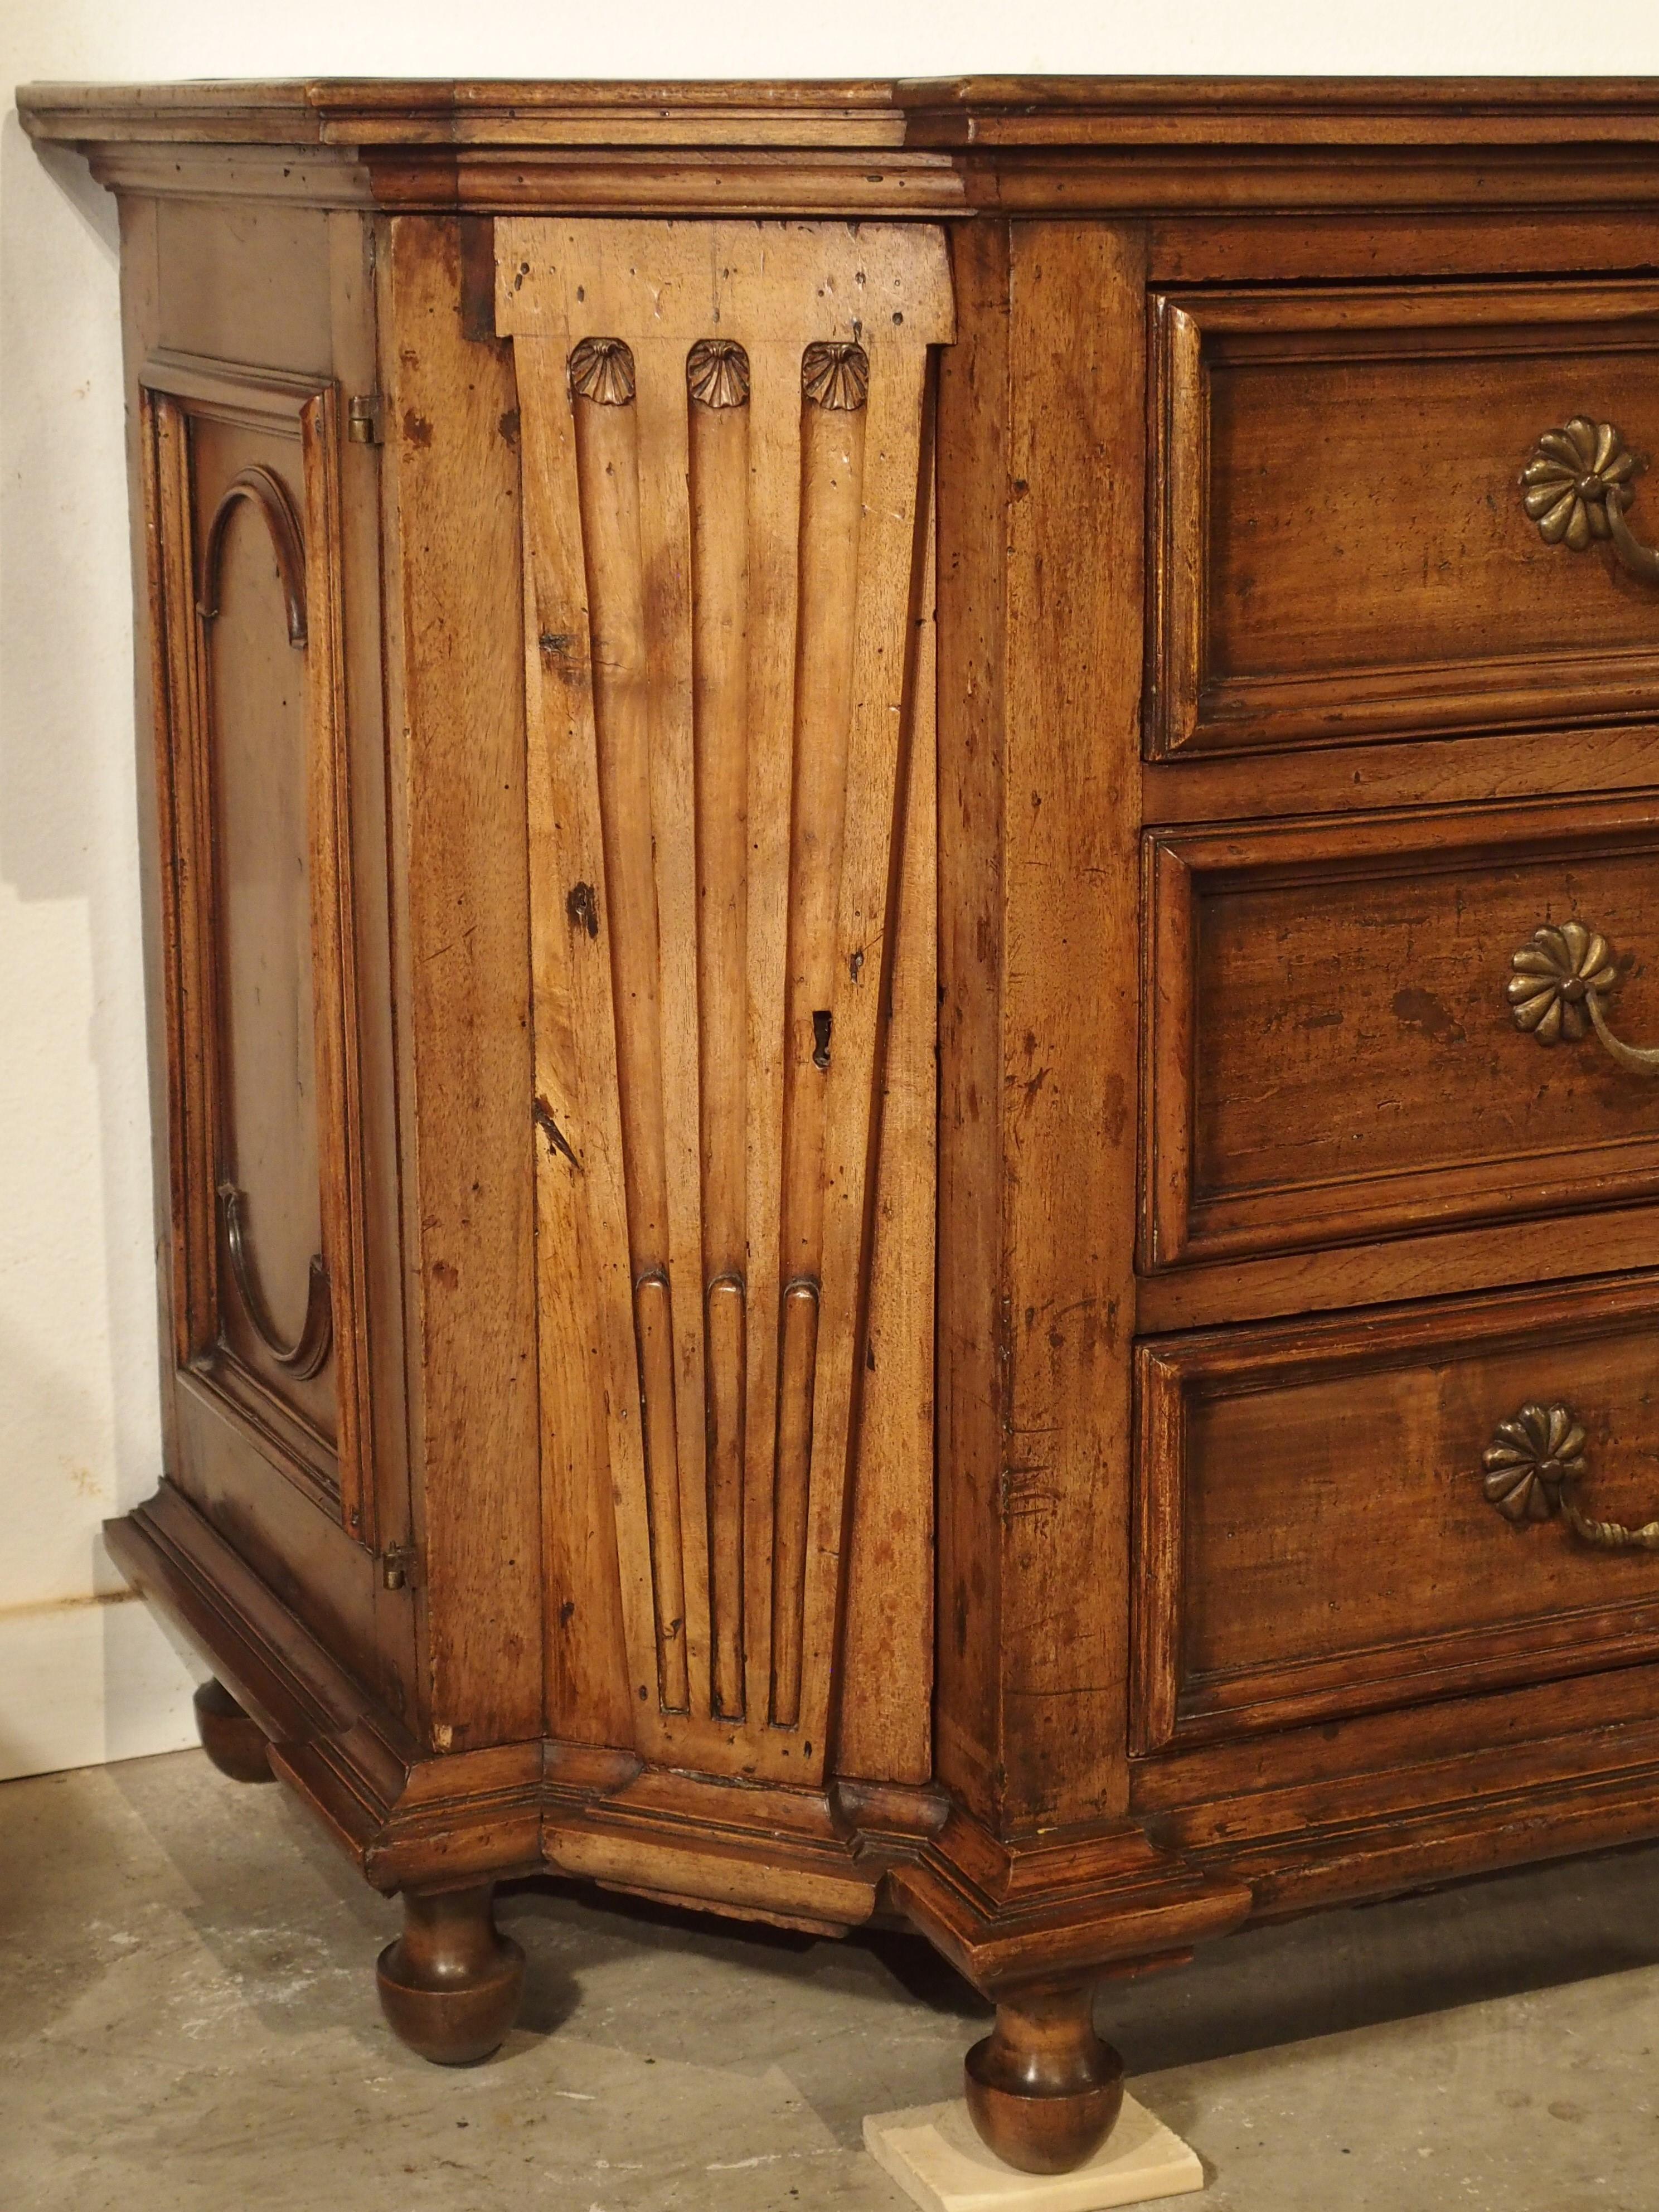 Hand-Carved Large Antique Tuscan Walnut Commode with Side Compartments, Early 1800s